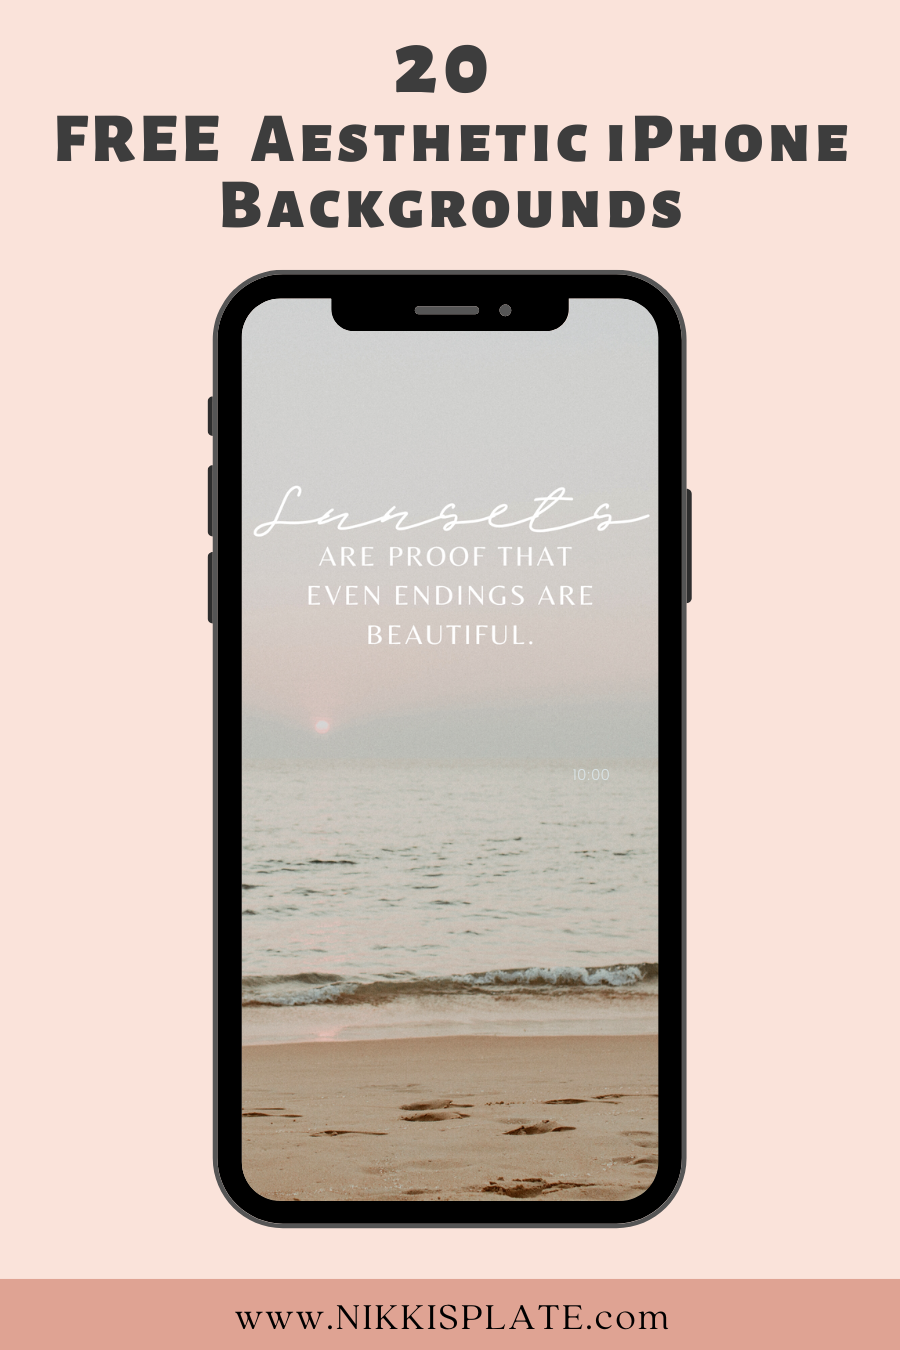 free aesthetic iPhone backgrounds, wallpapers & screensavers